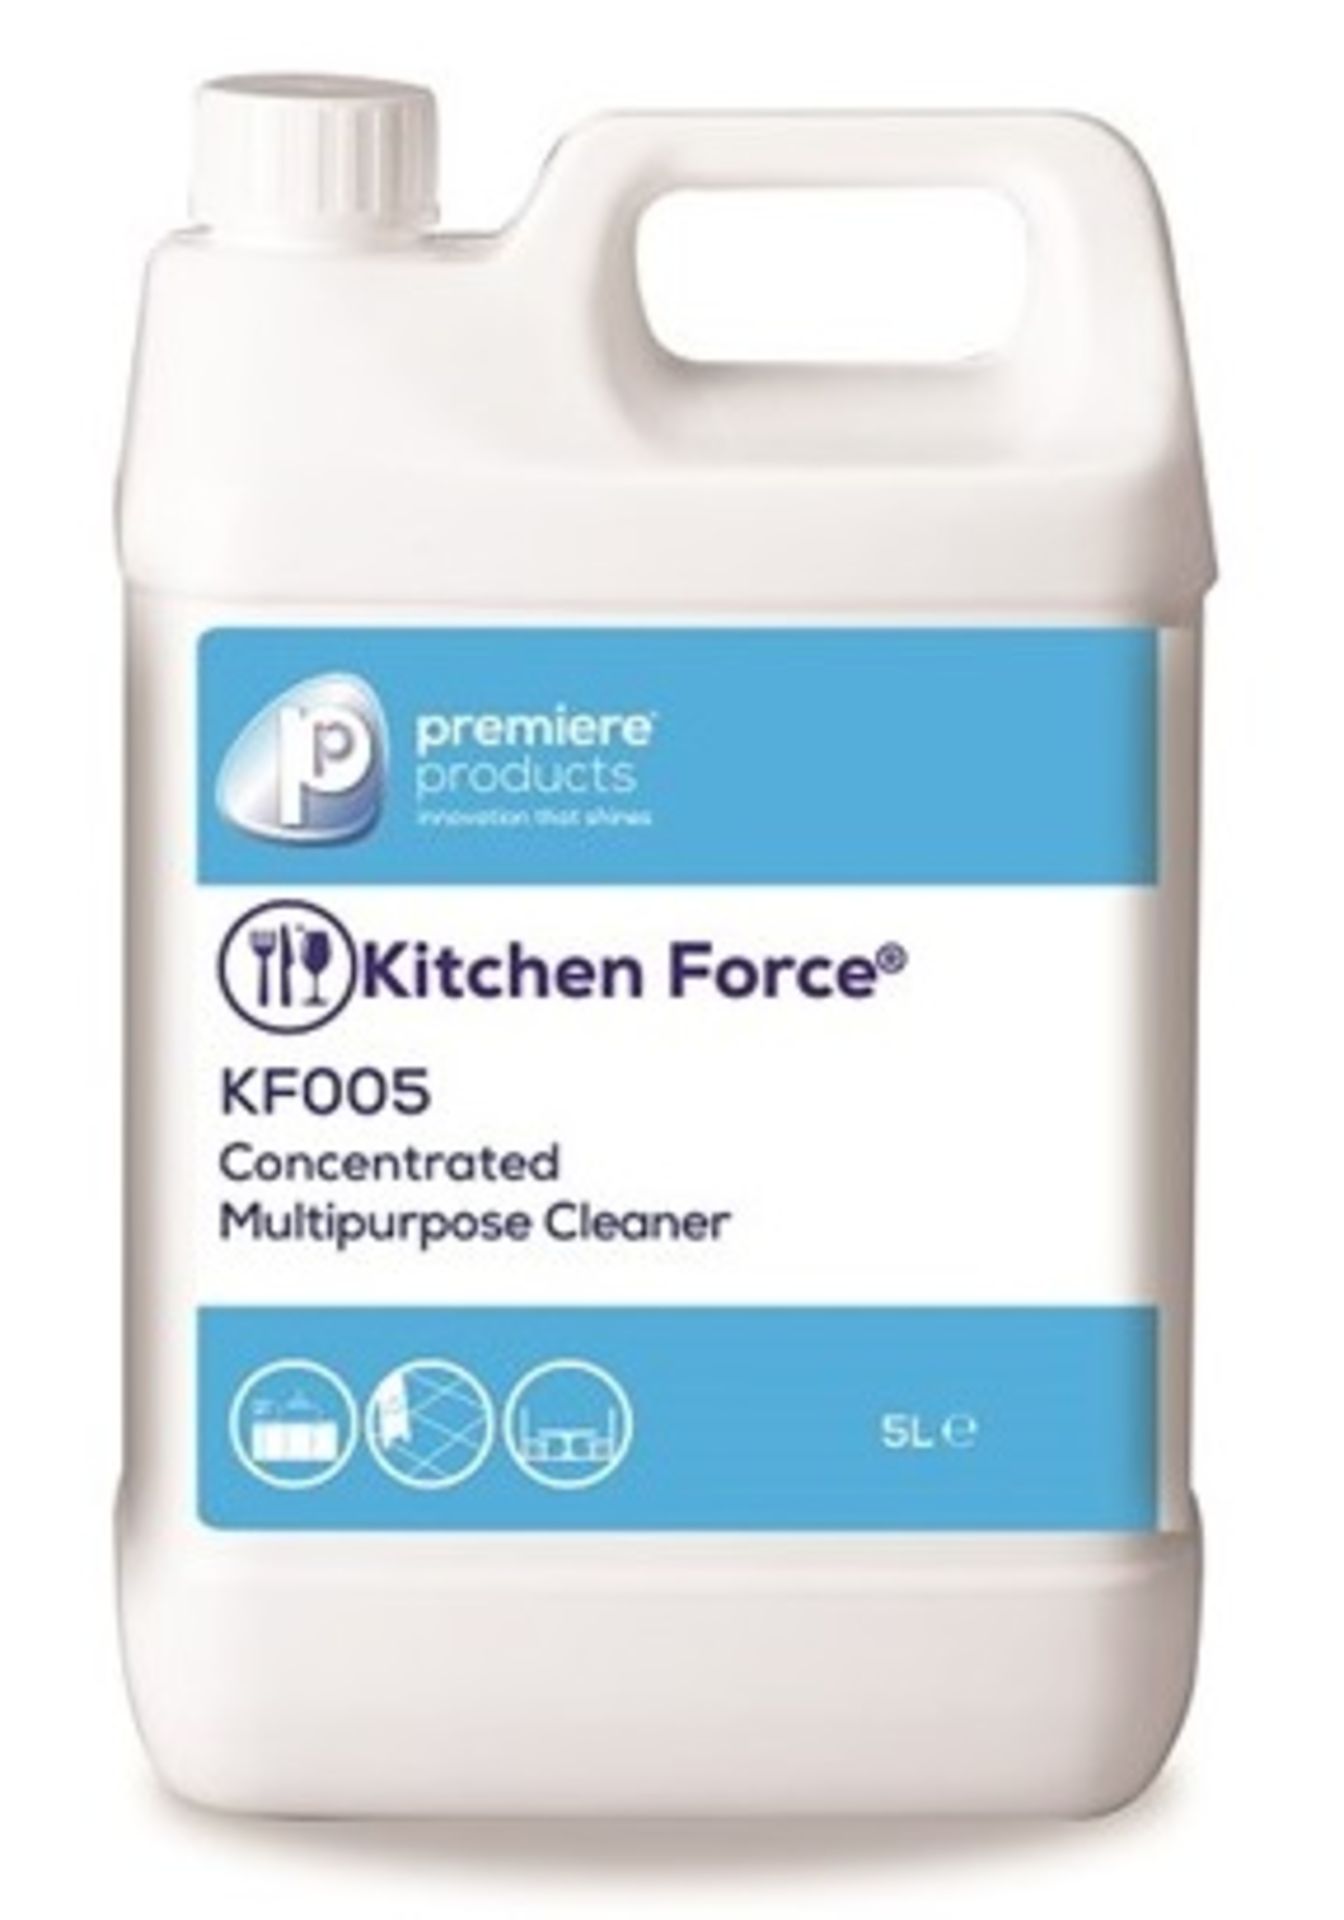 10 x Kitchen Force 5 Litre Concentrated Multipurpose Cleaner - Premiere Products - Includes 10 x 5 L